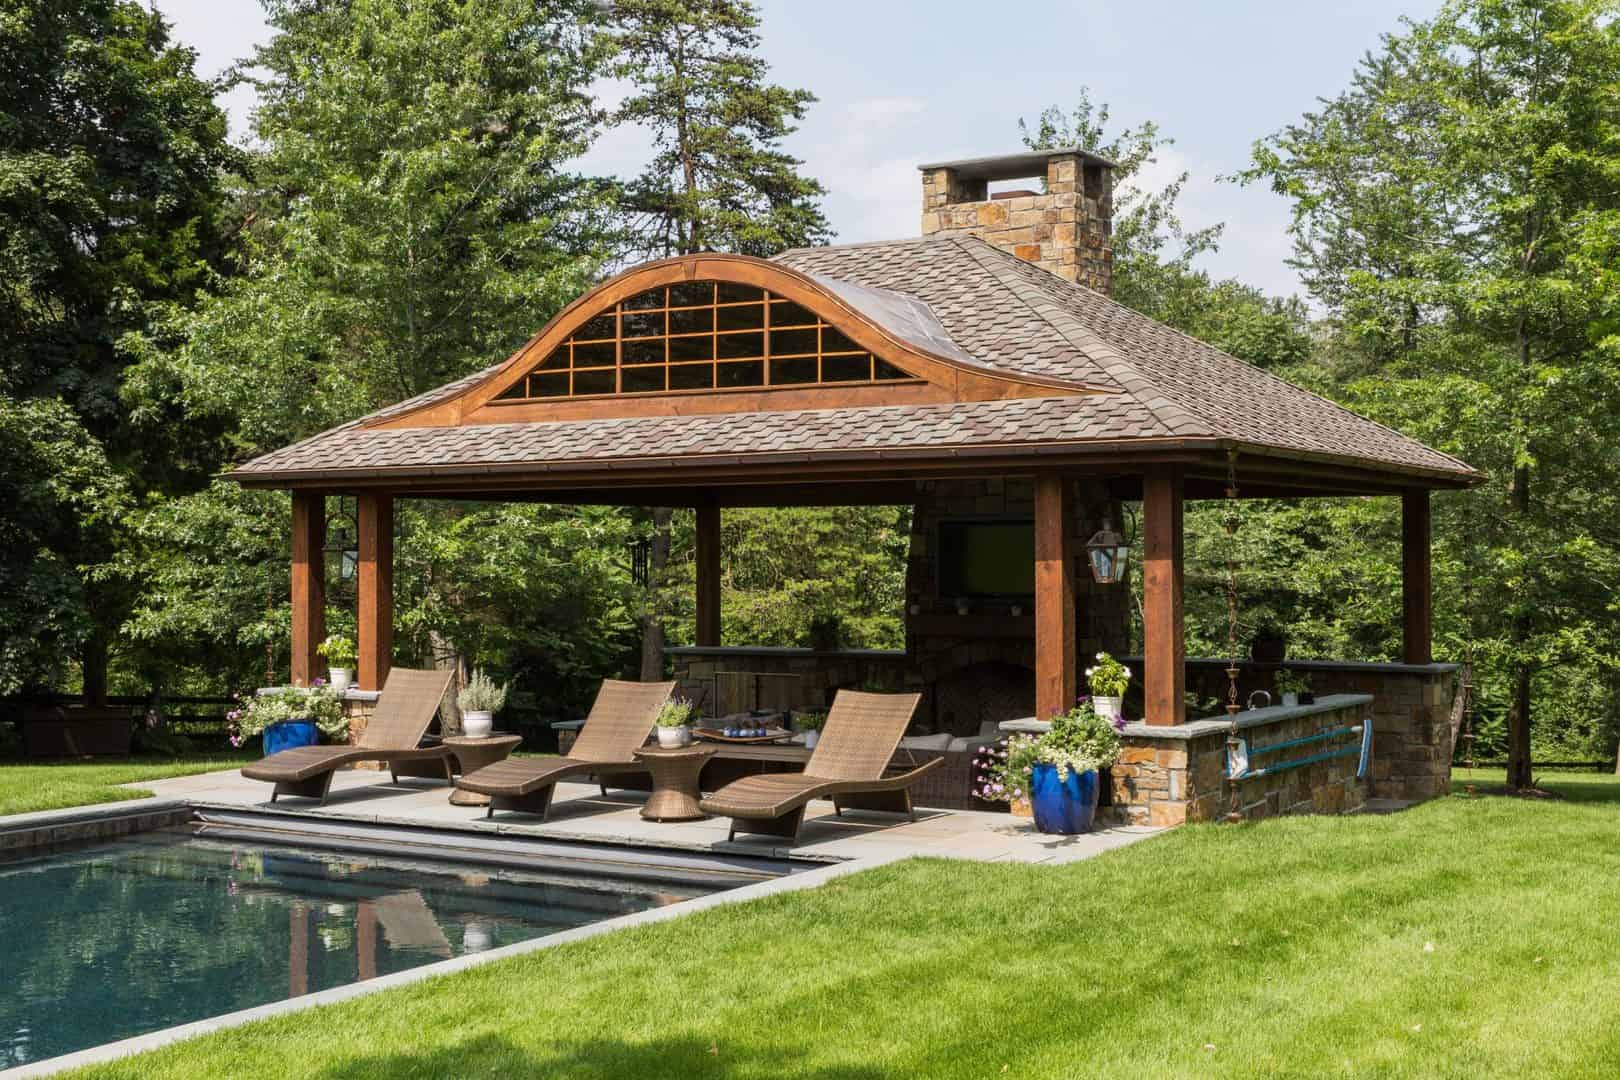 6 Things To Add To Your Backyard To Take It From Good To Great Fronheiser Pools